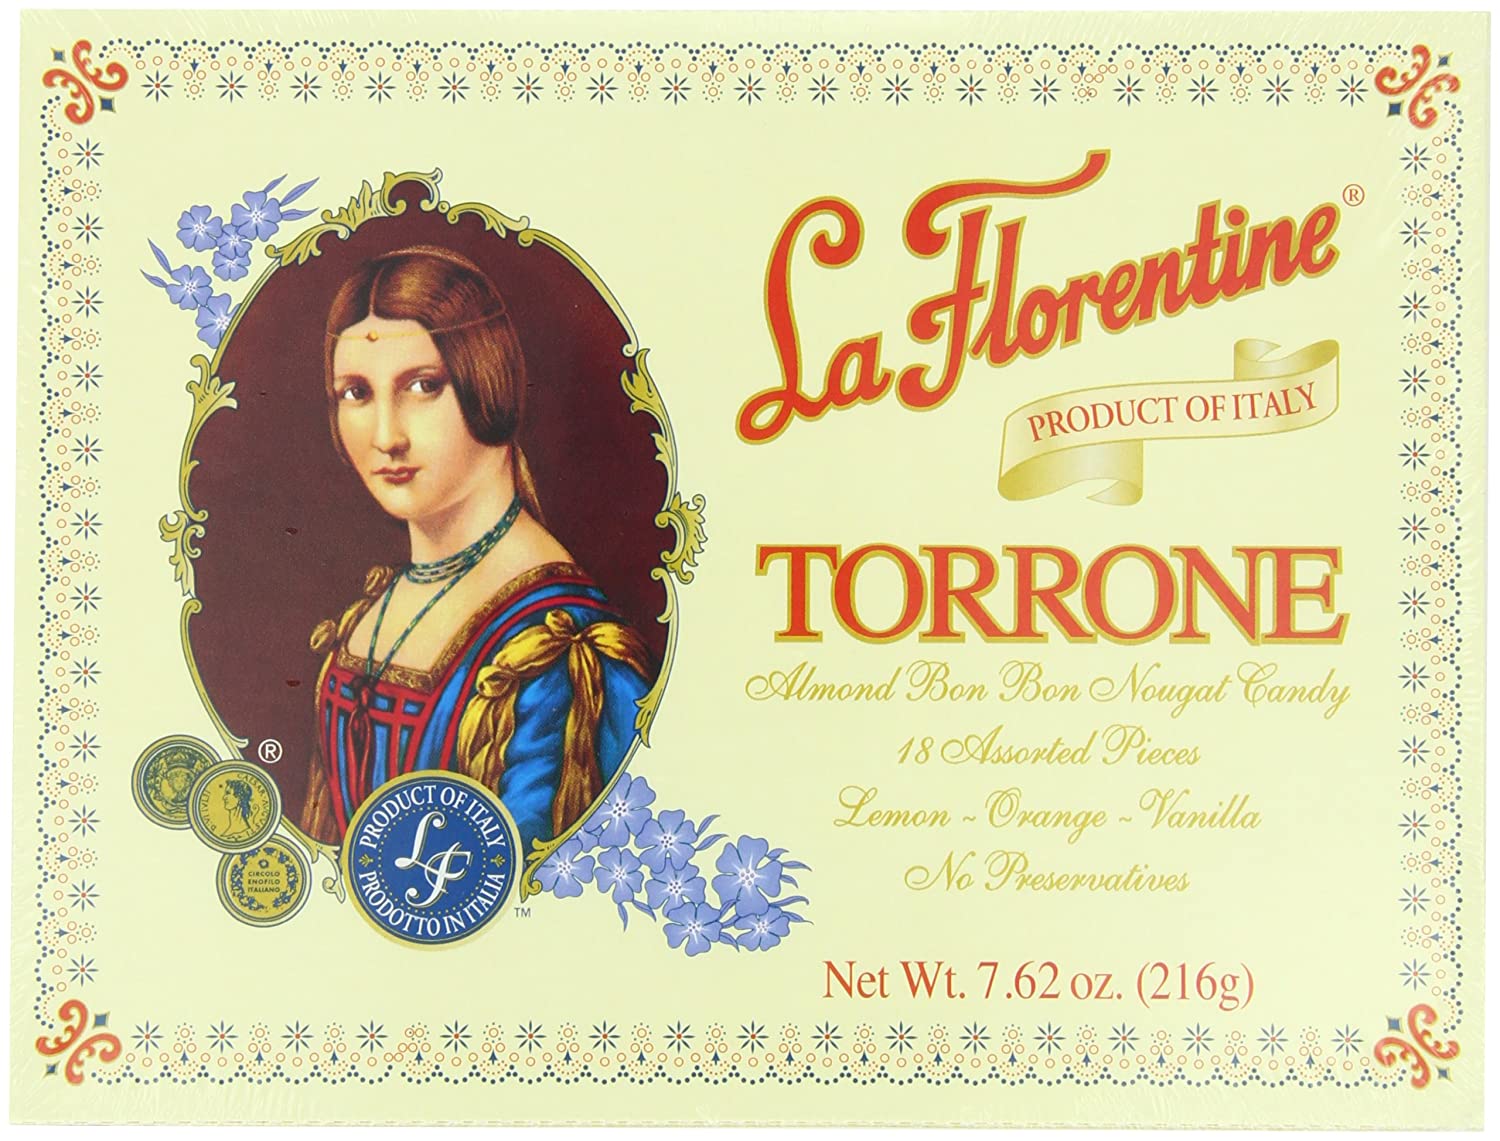 Case of 24, 7.62-Ounce Boxes of Torrone Italian Candy for $37.99 or $32.29 on Subscribe and Save